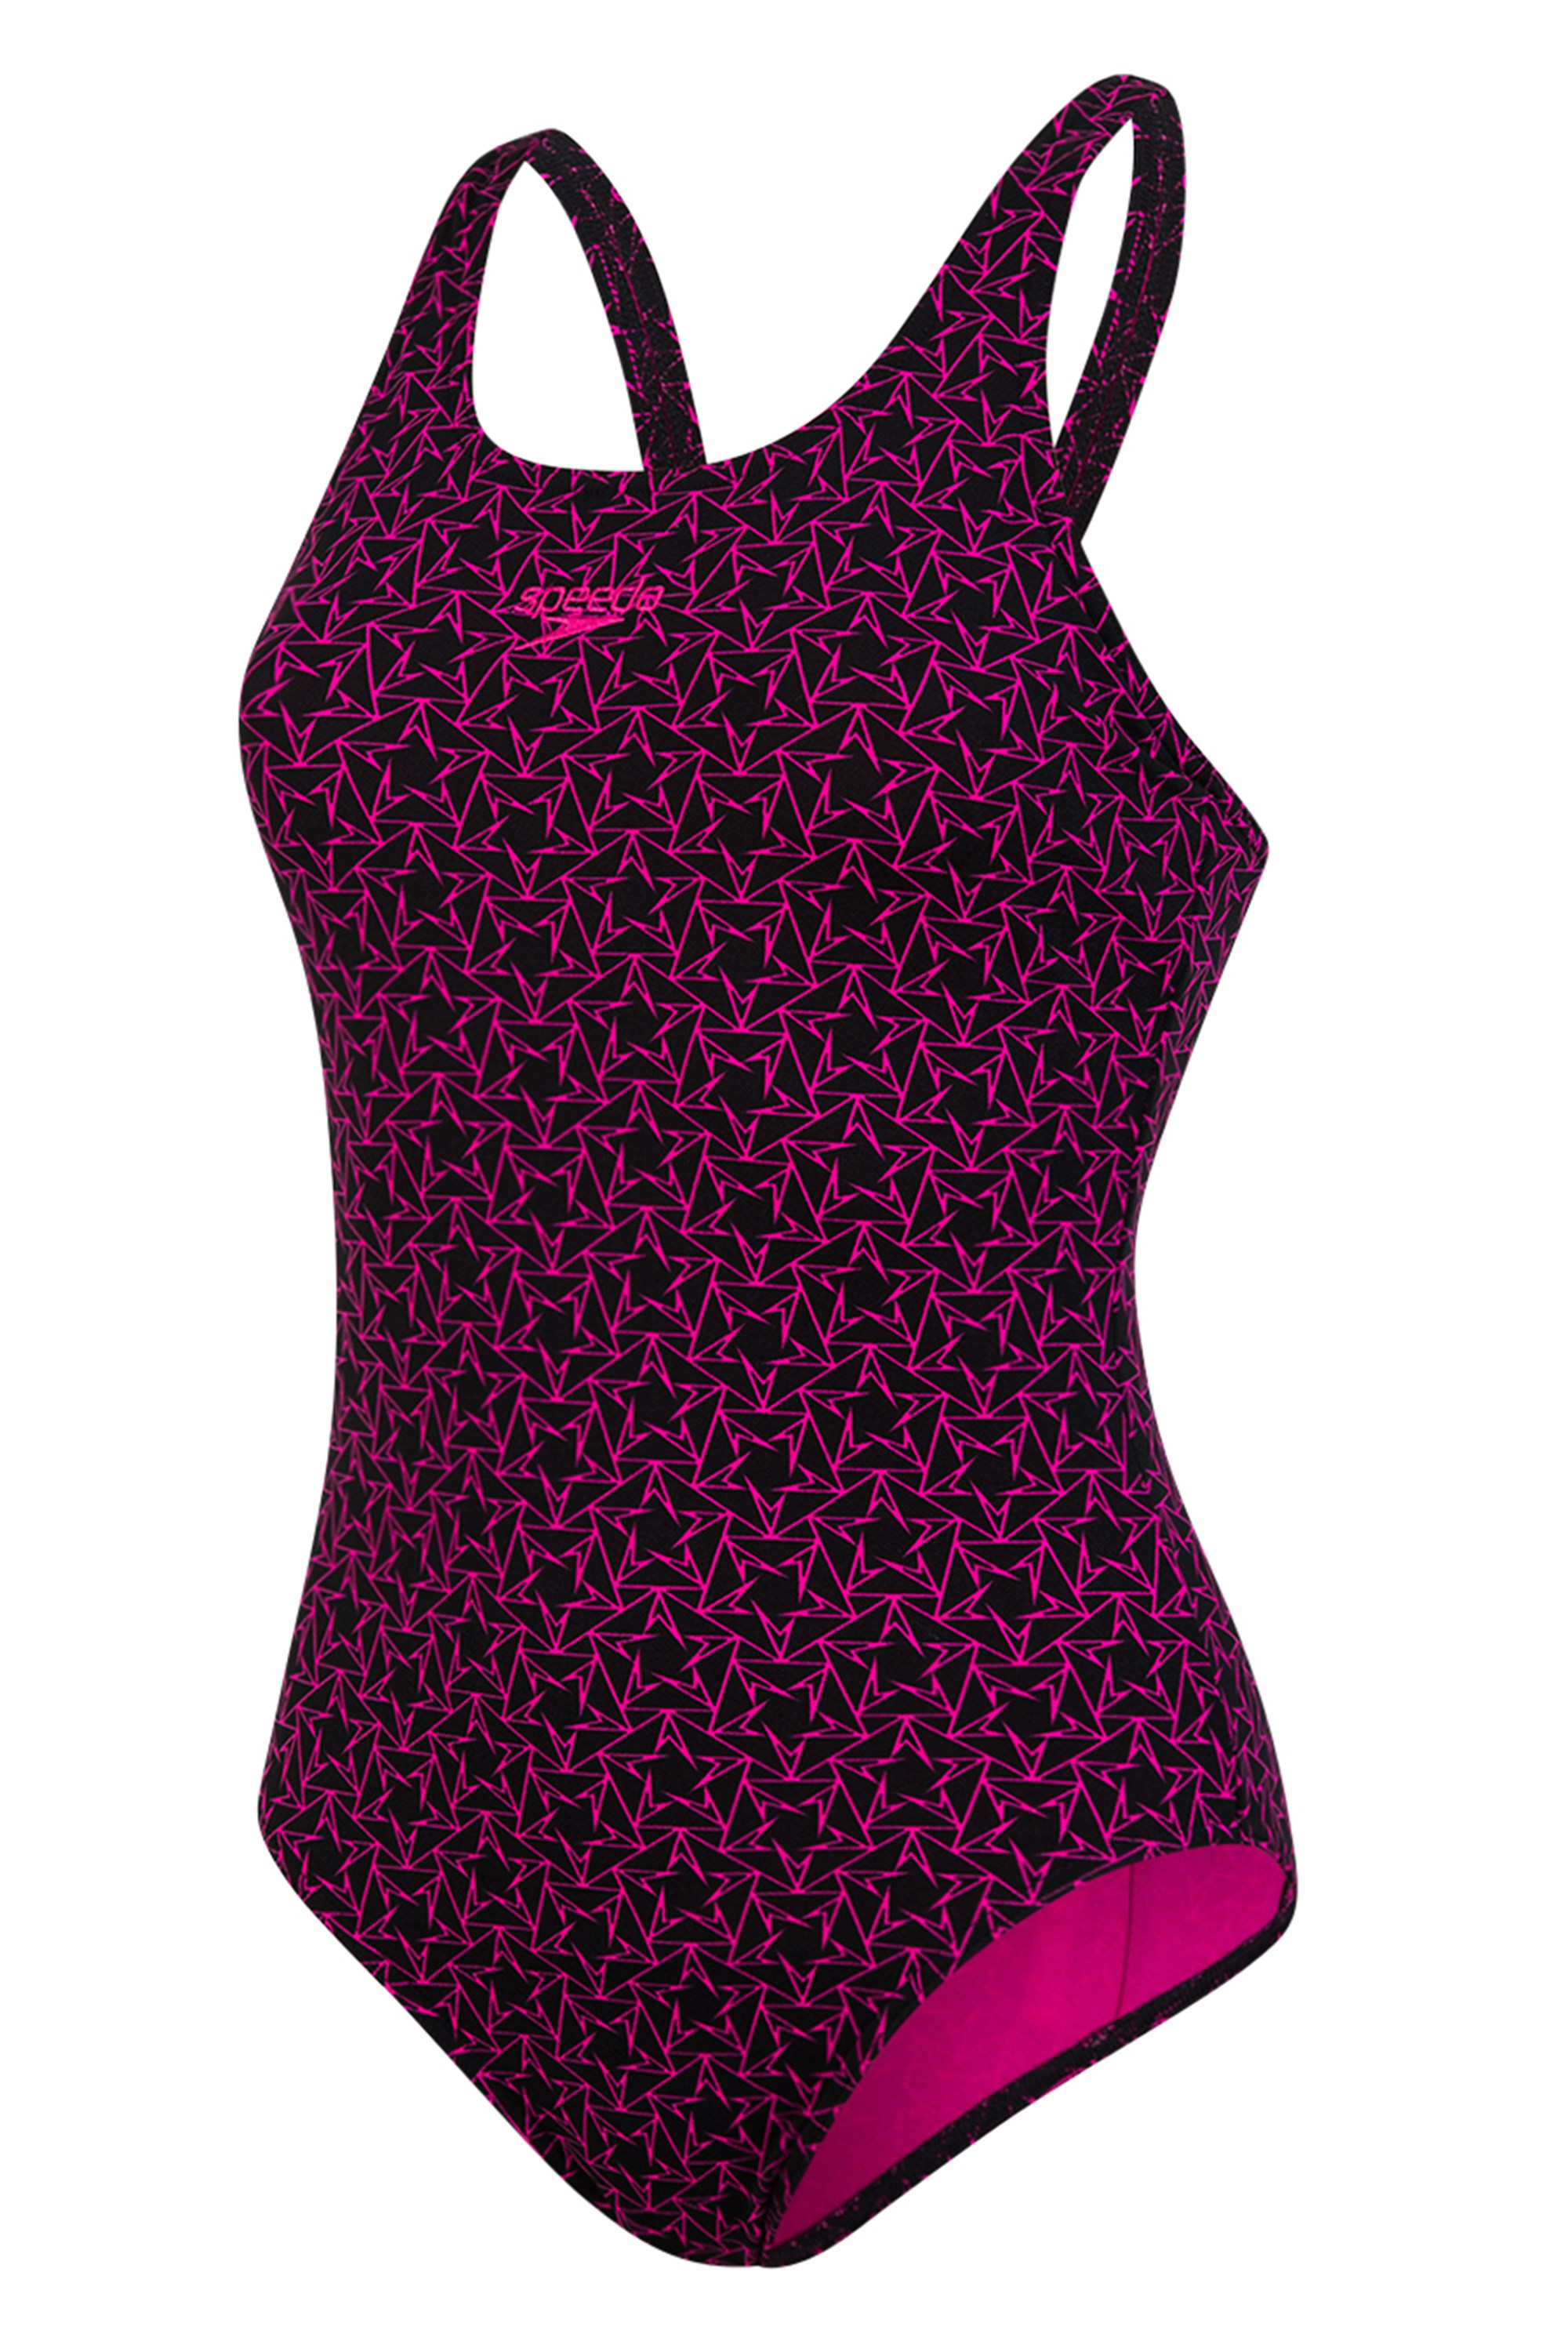 Boomstar Allover Muscleback Womens Swimsuit - Black